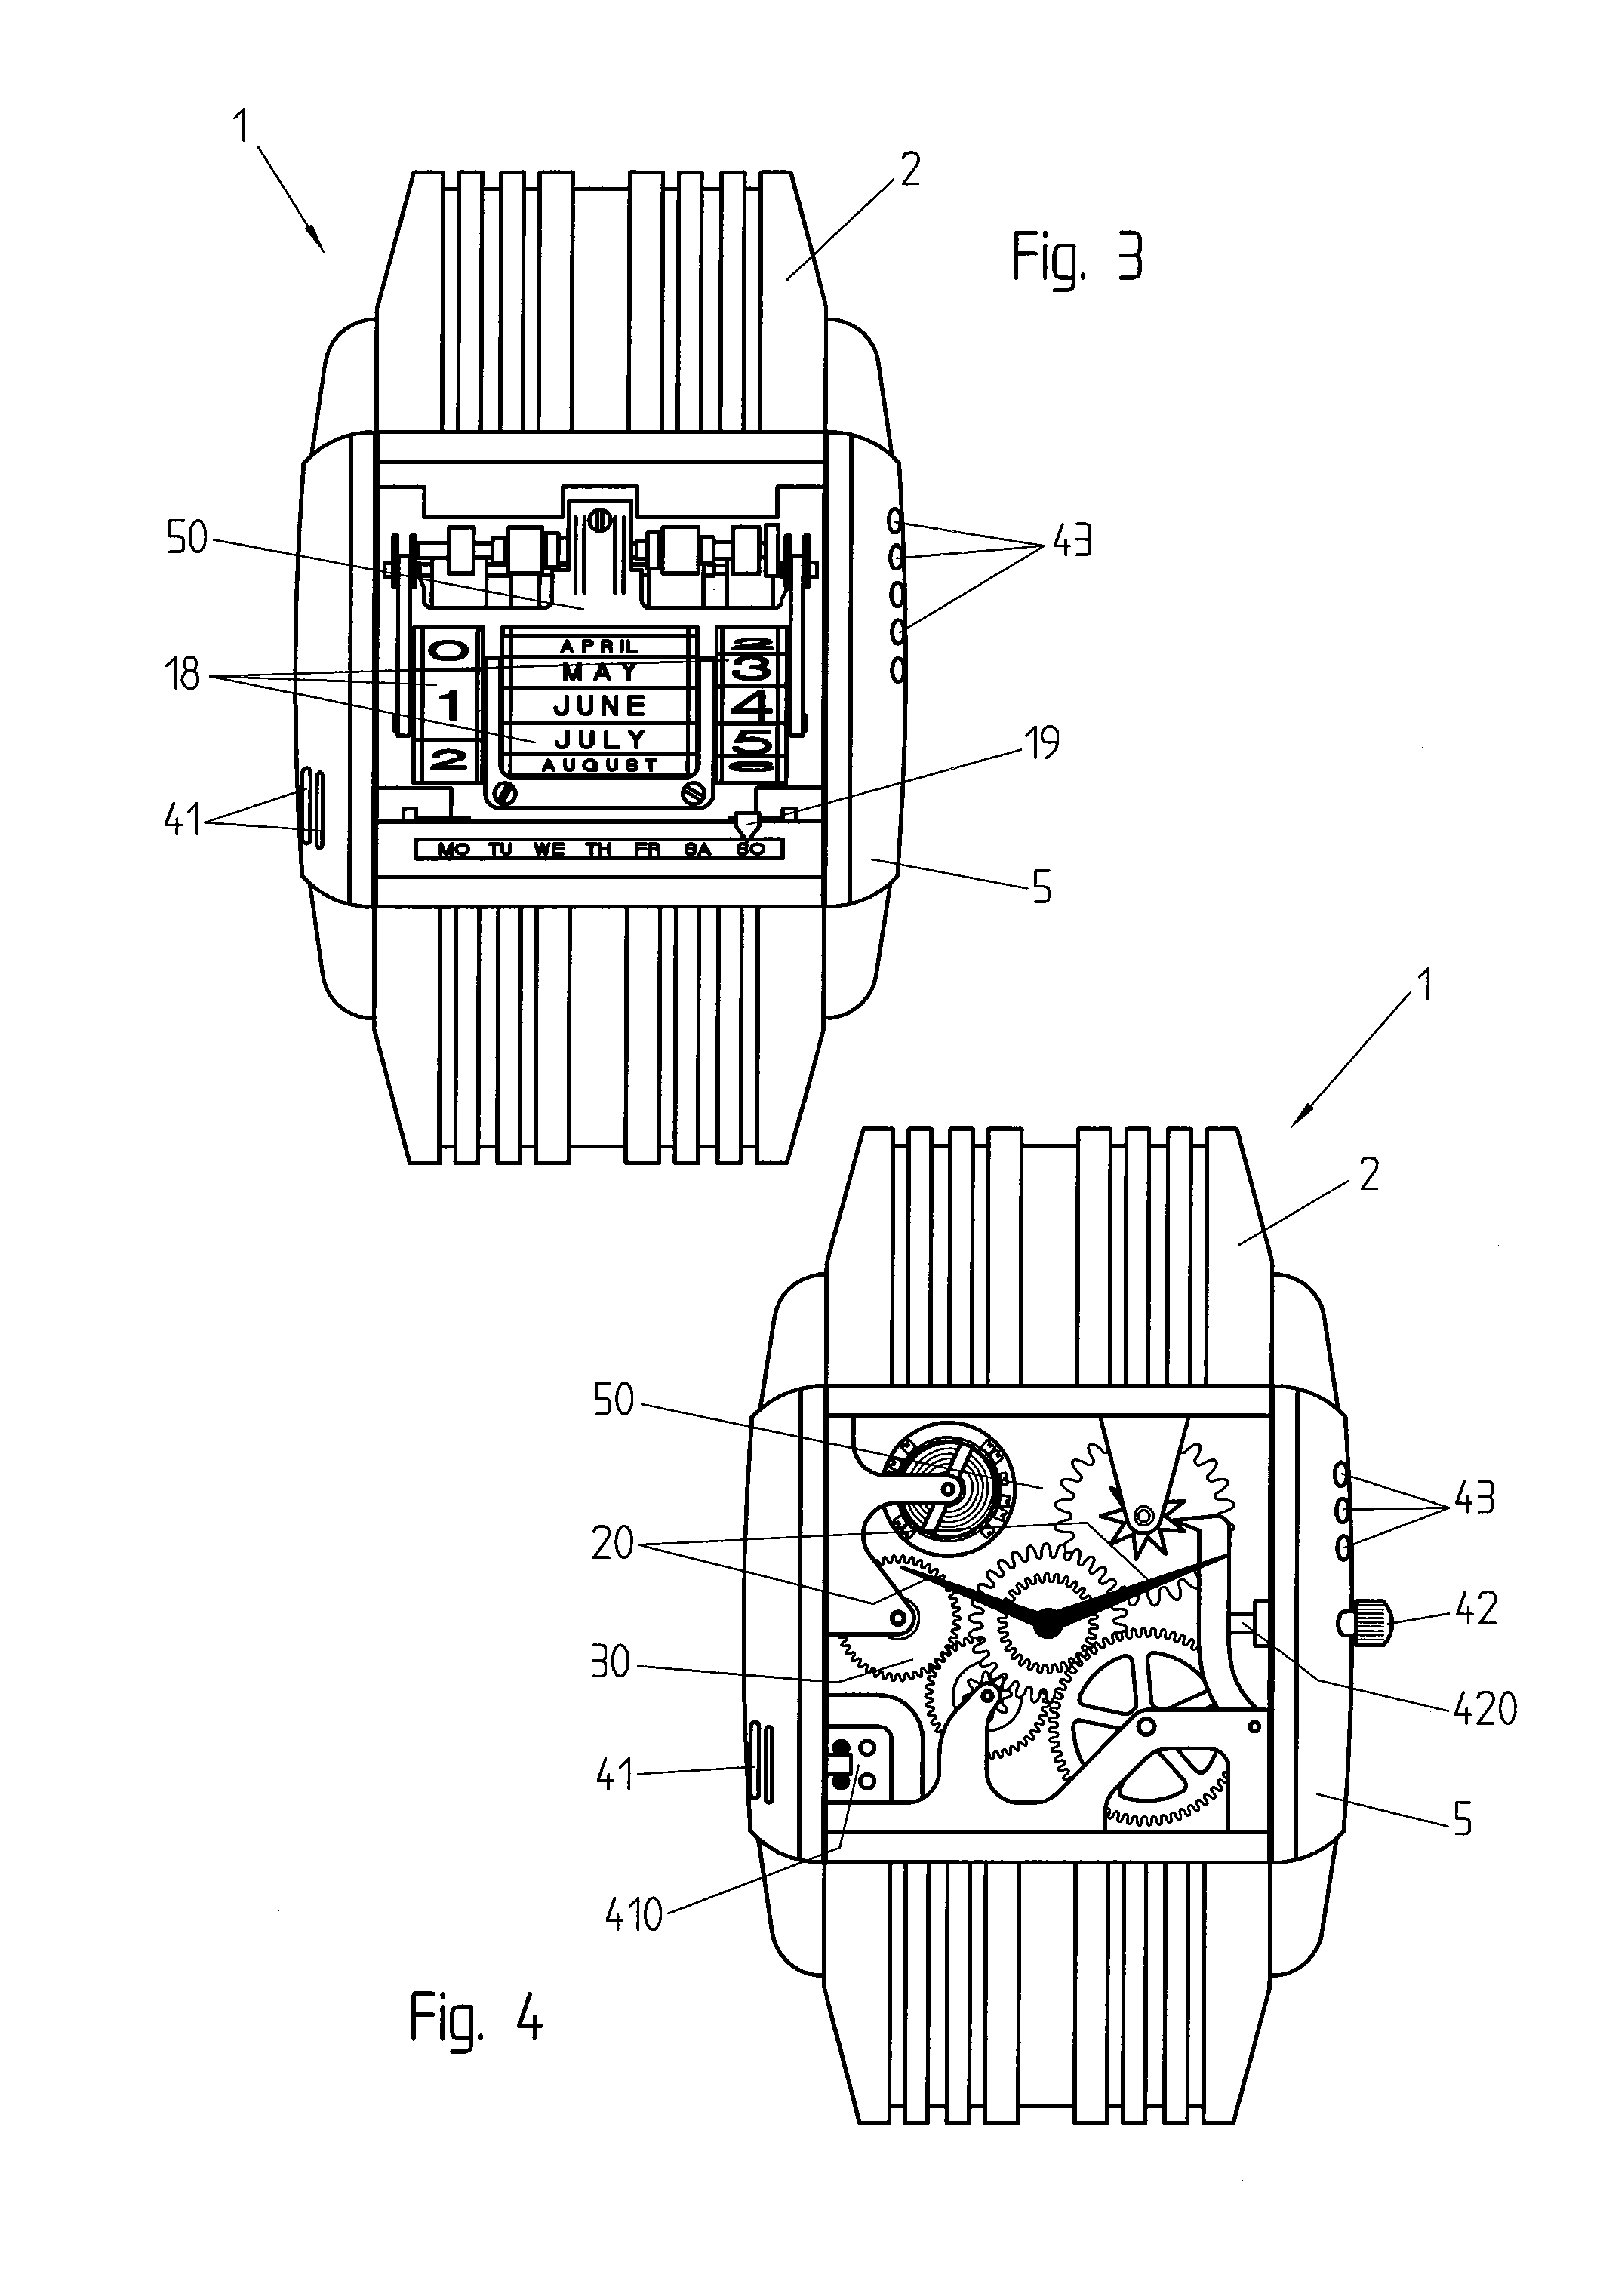 Wristwatch with electronic display